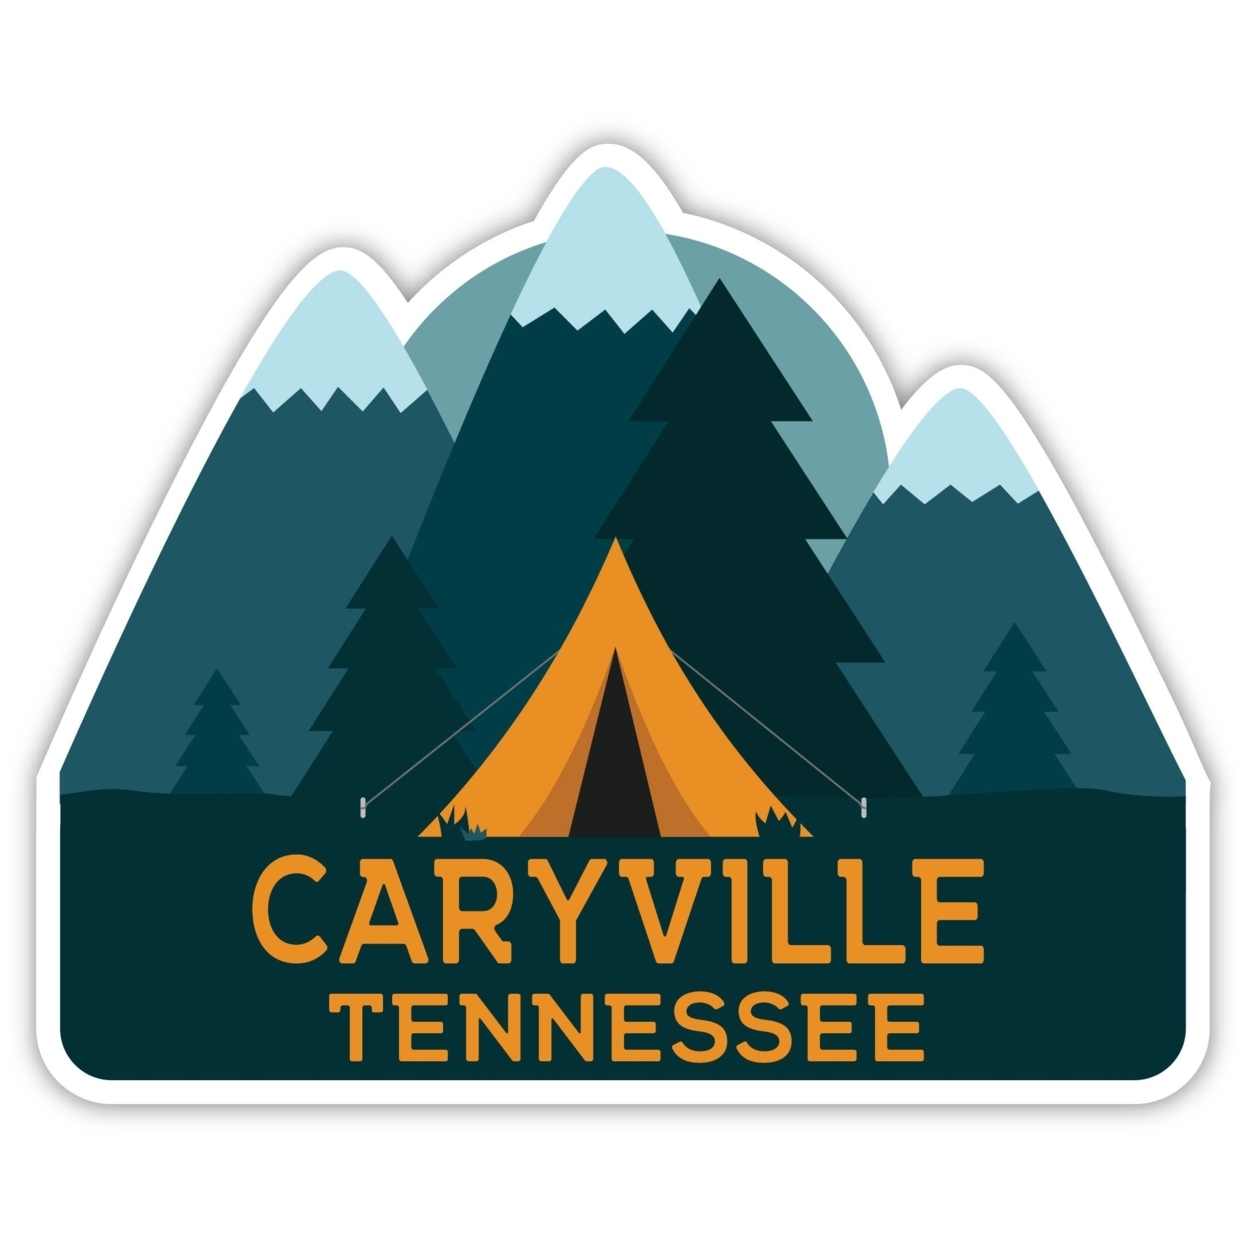 Caryville Tennessee Souvenir Decorative Stickers (Choose Theme And Size) - 4-Pack, 12-Inch, Tent